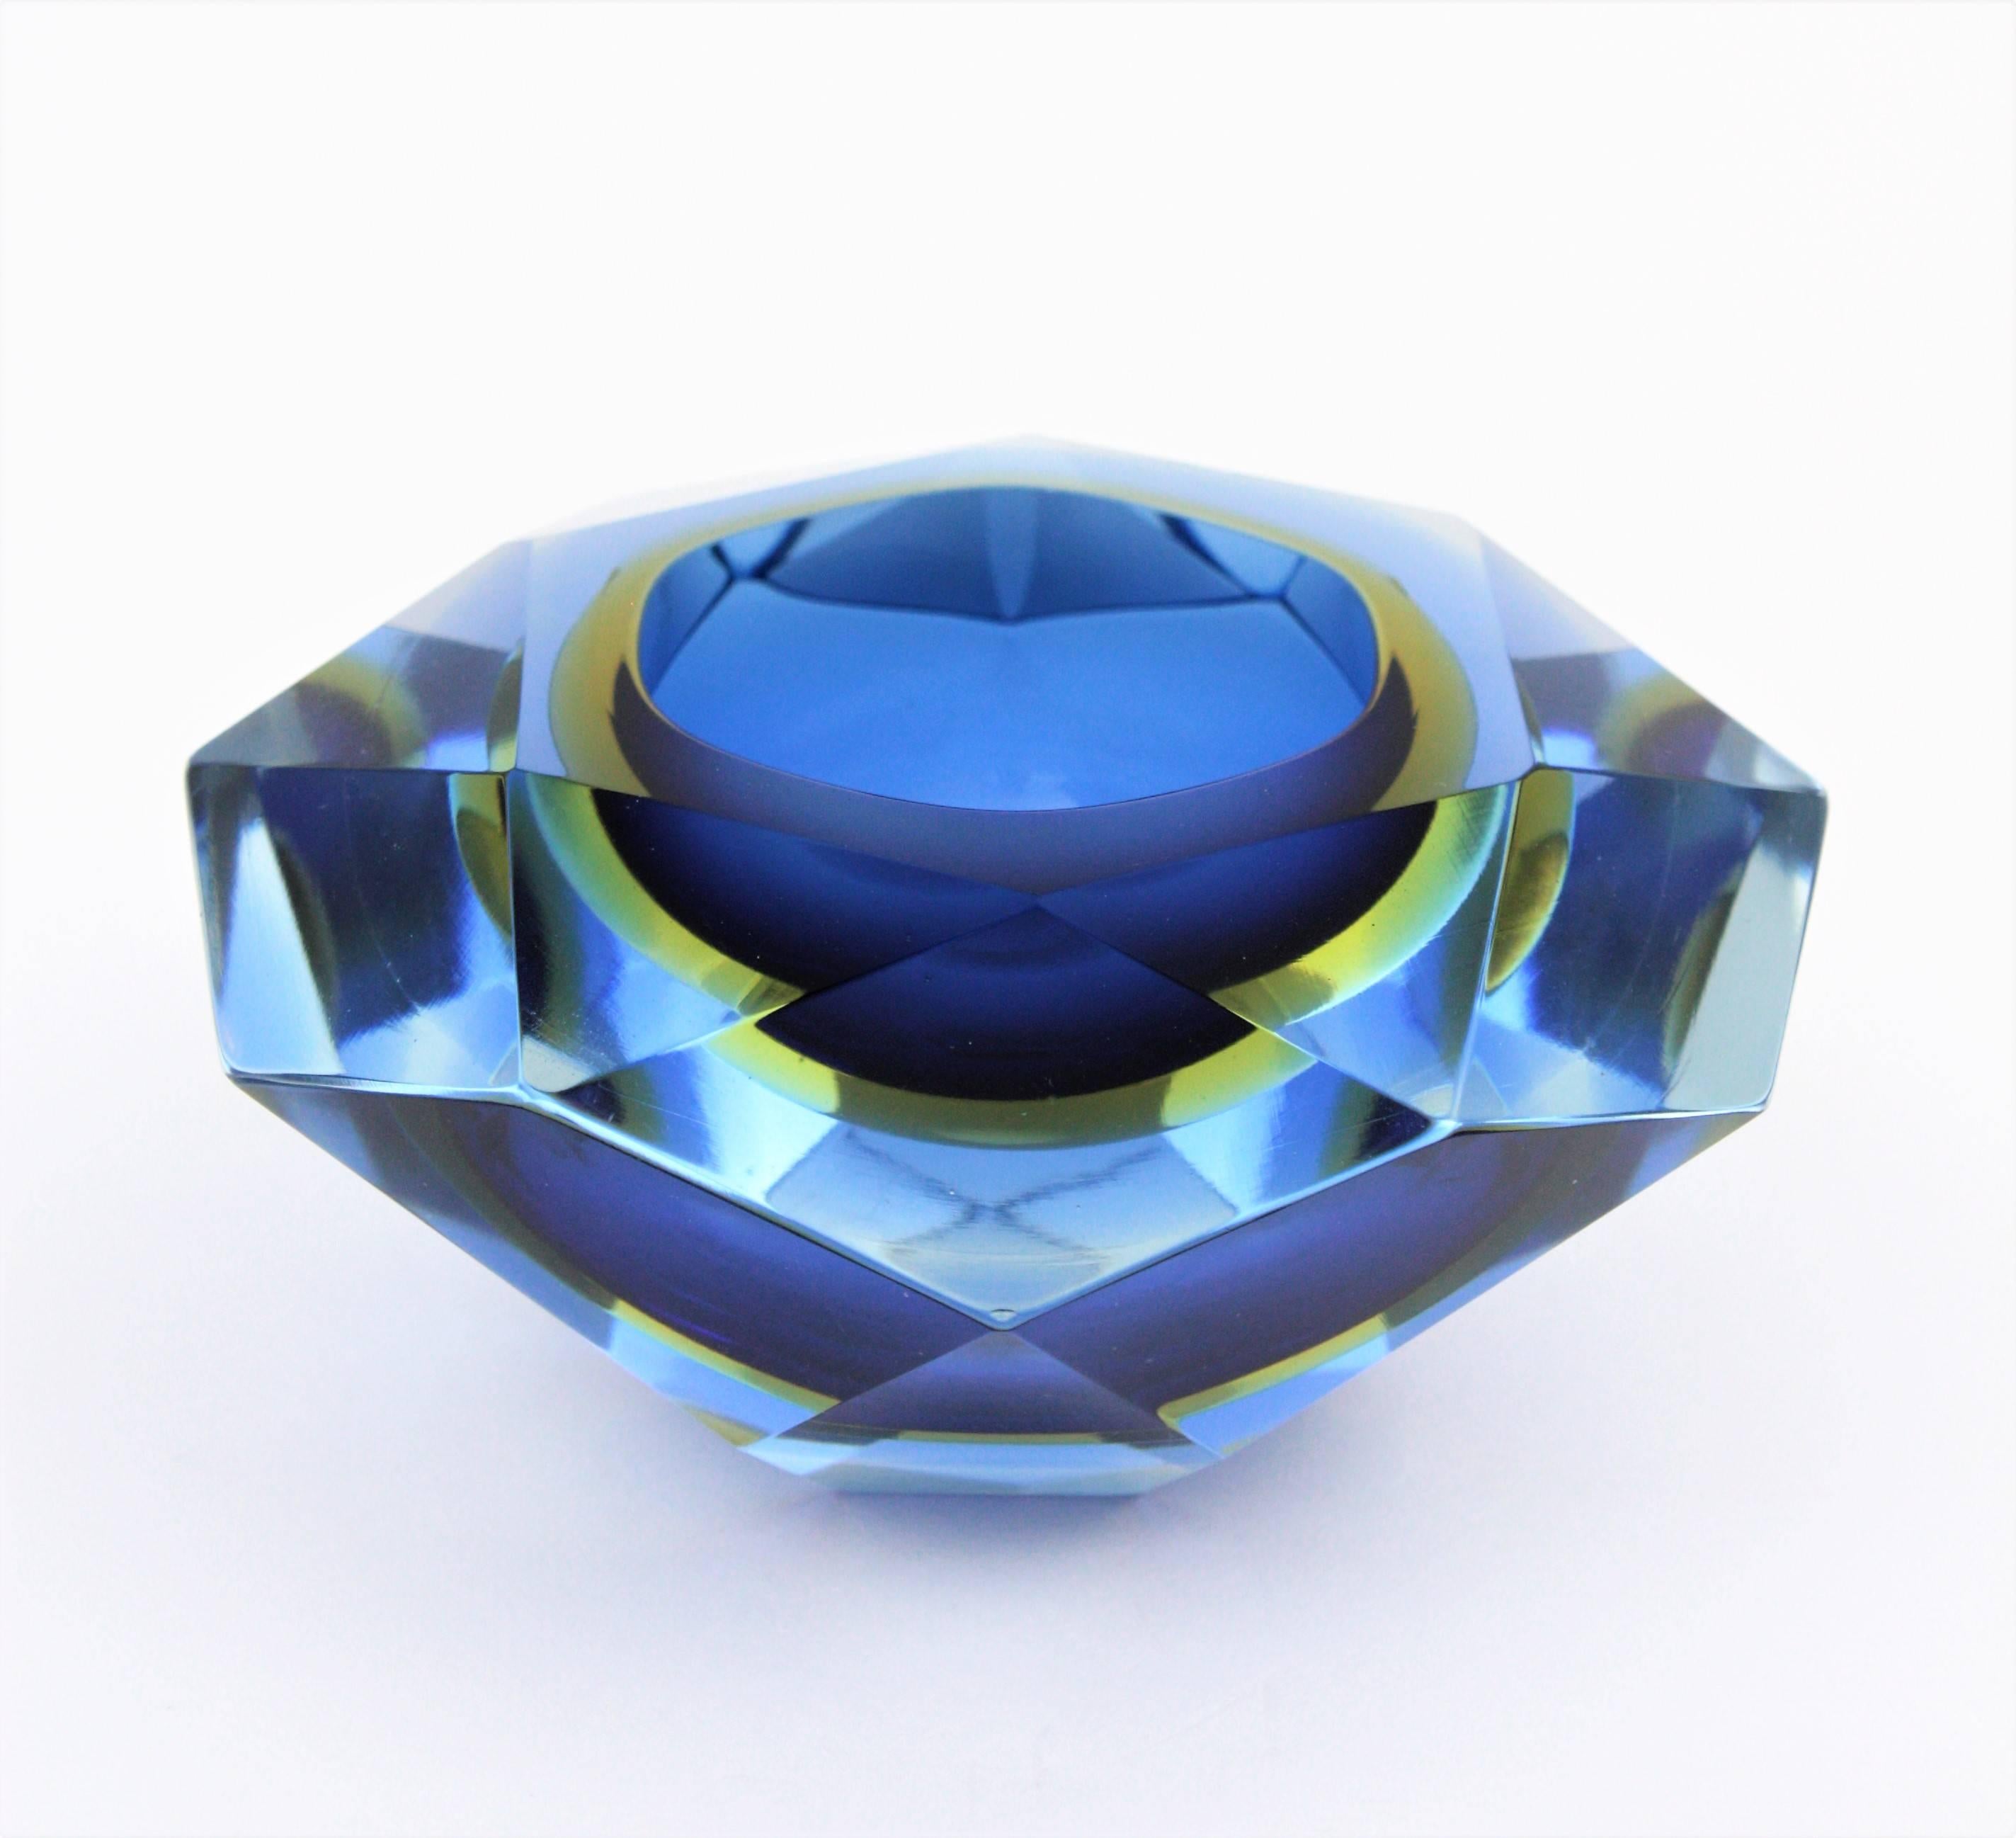 Flavio Poli Murano Cobalt Blue and Yellow Sommerso Faceted Giant Art Glass Bowl 2